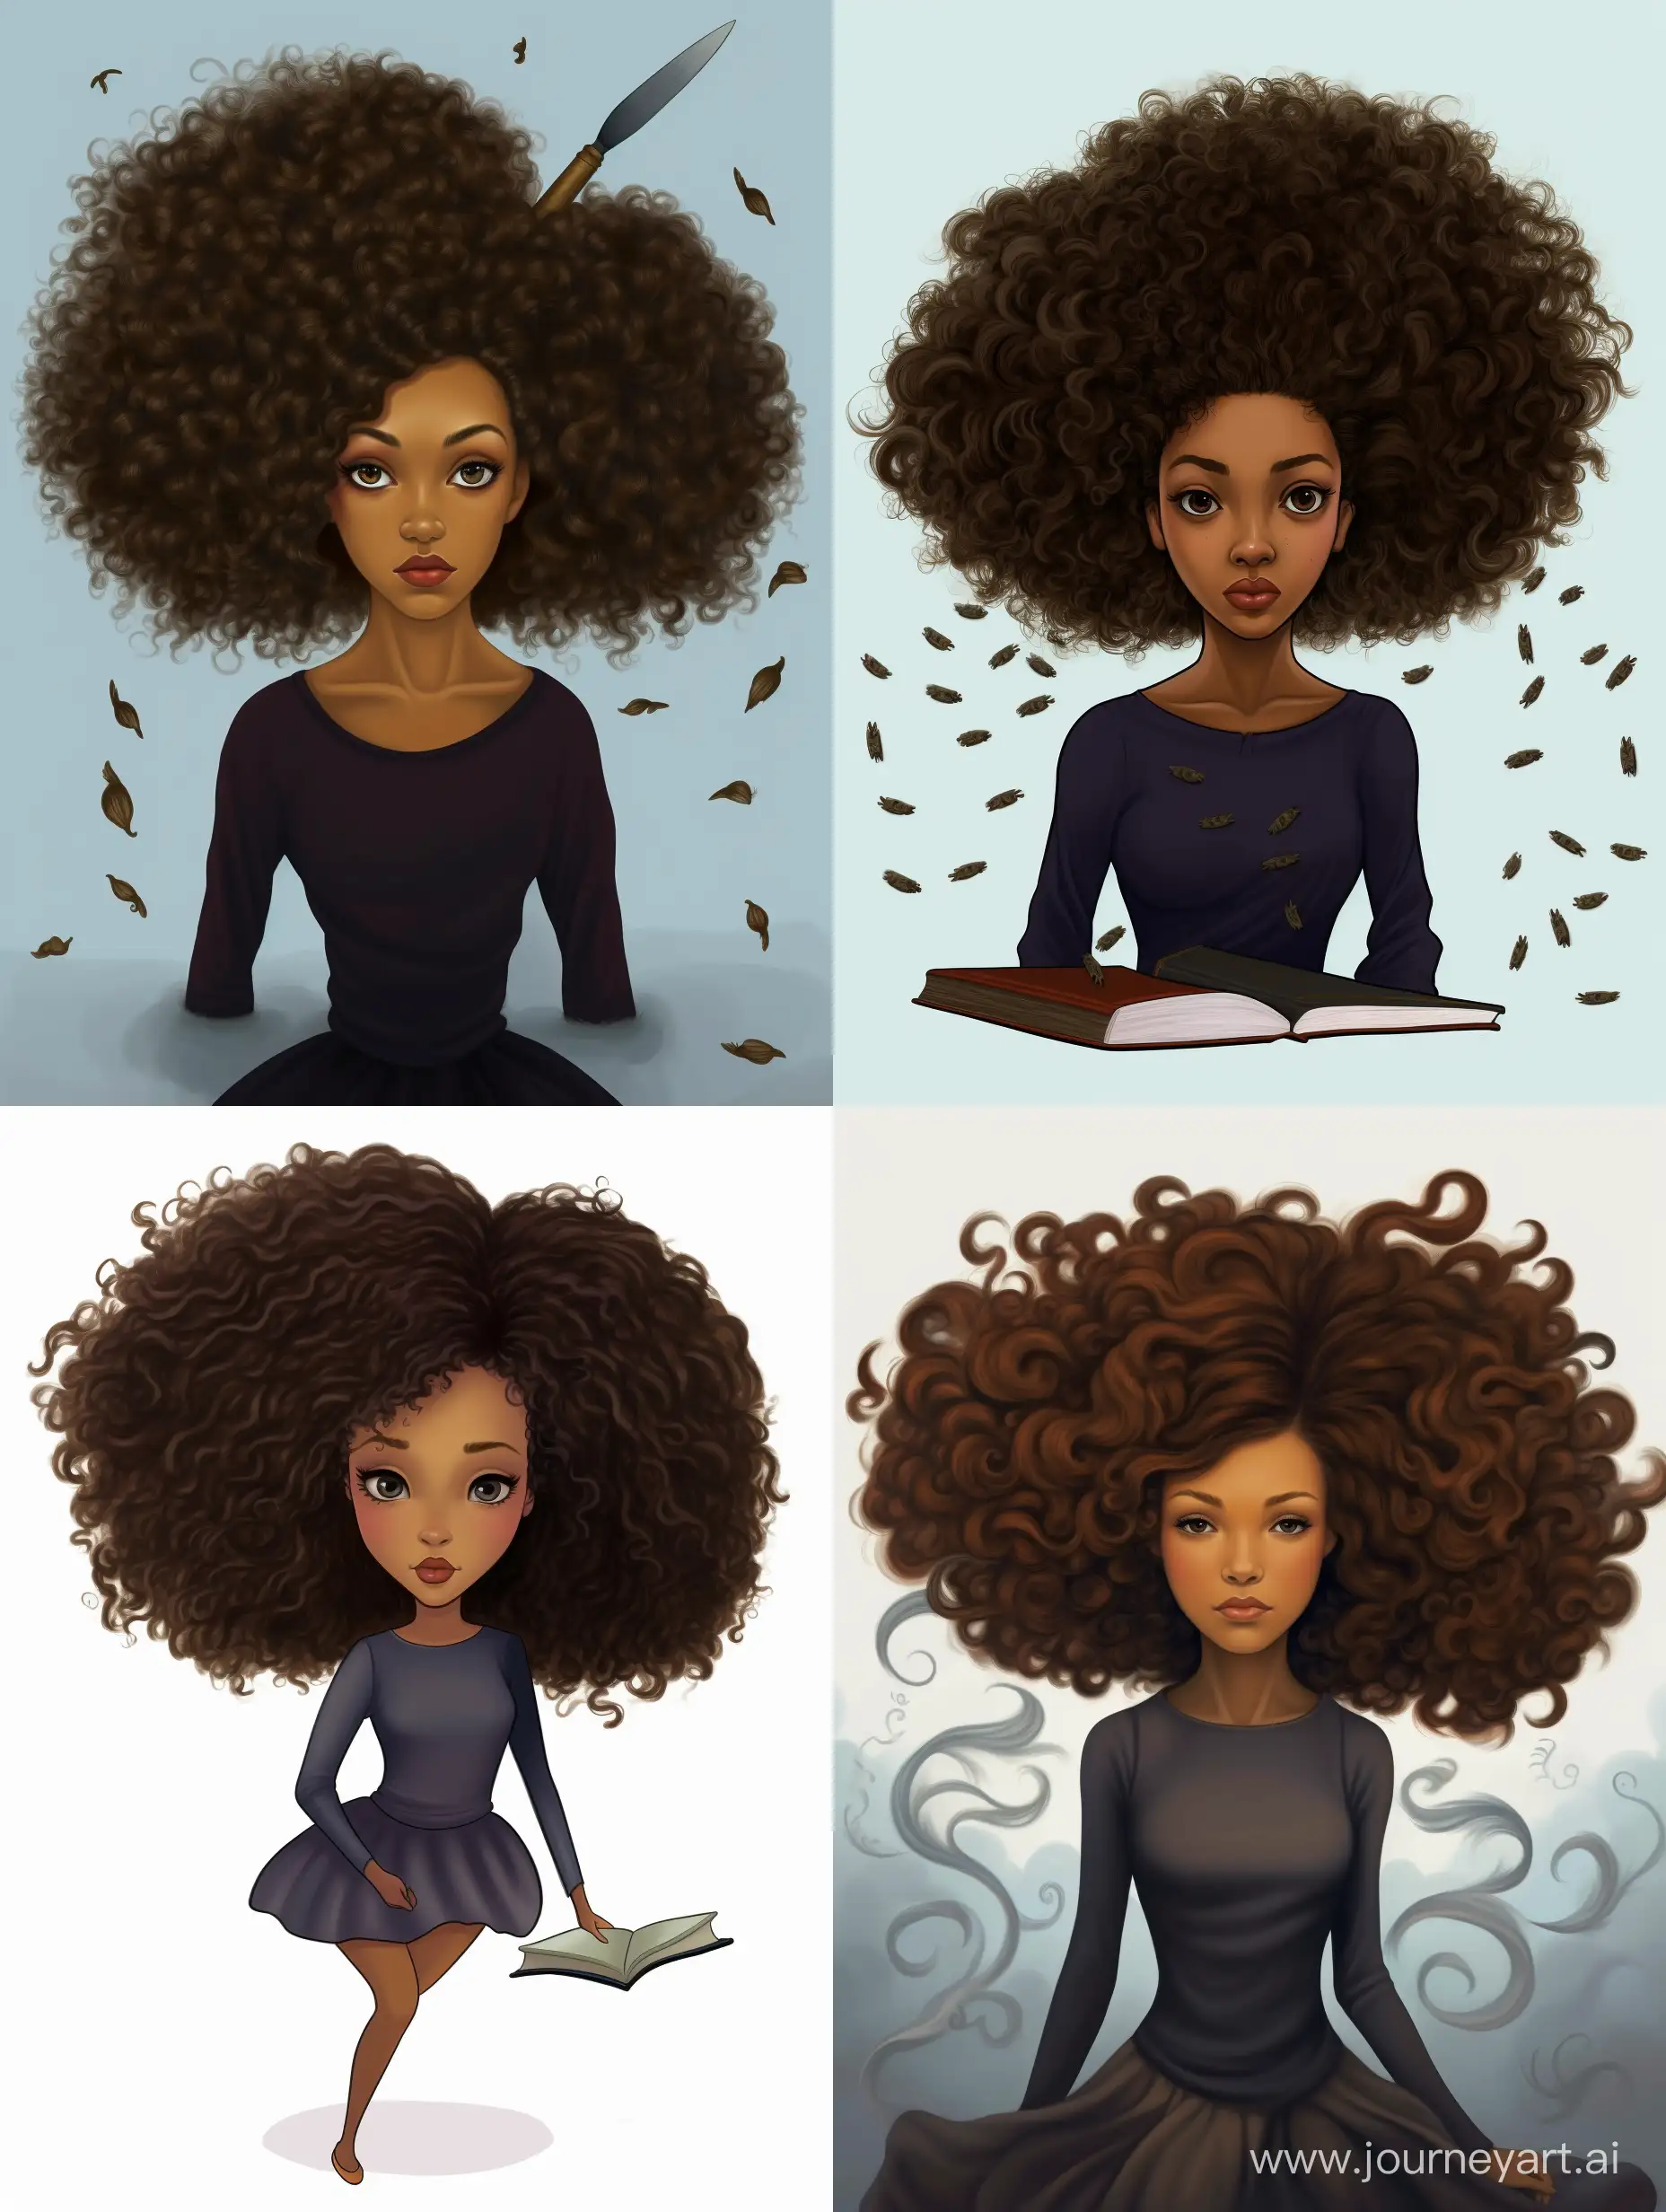 Empowering-Transformation-CurlyHaired-Woman-with-Alopecia-Receives-New-Wig